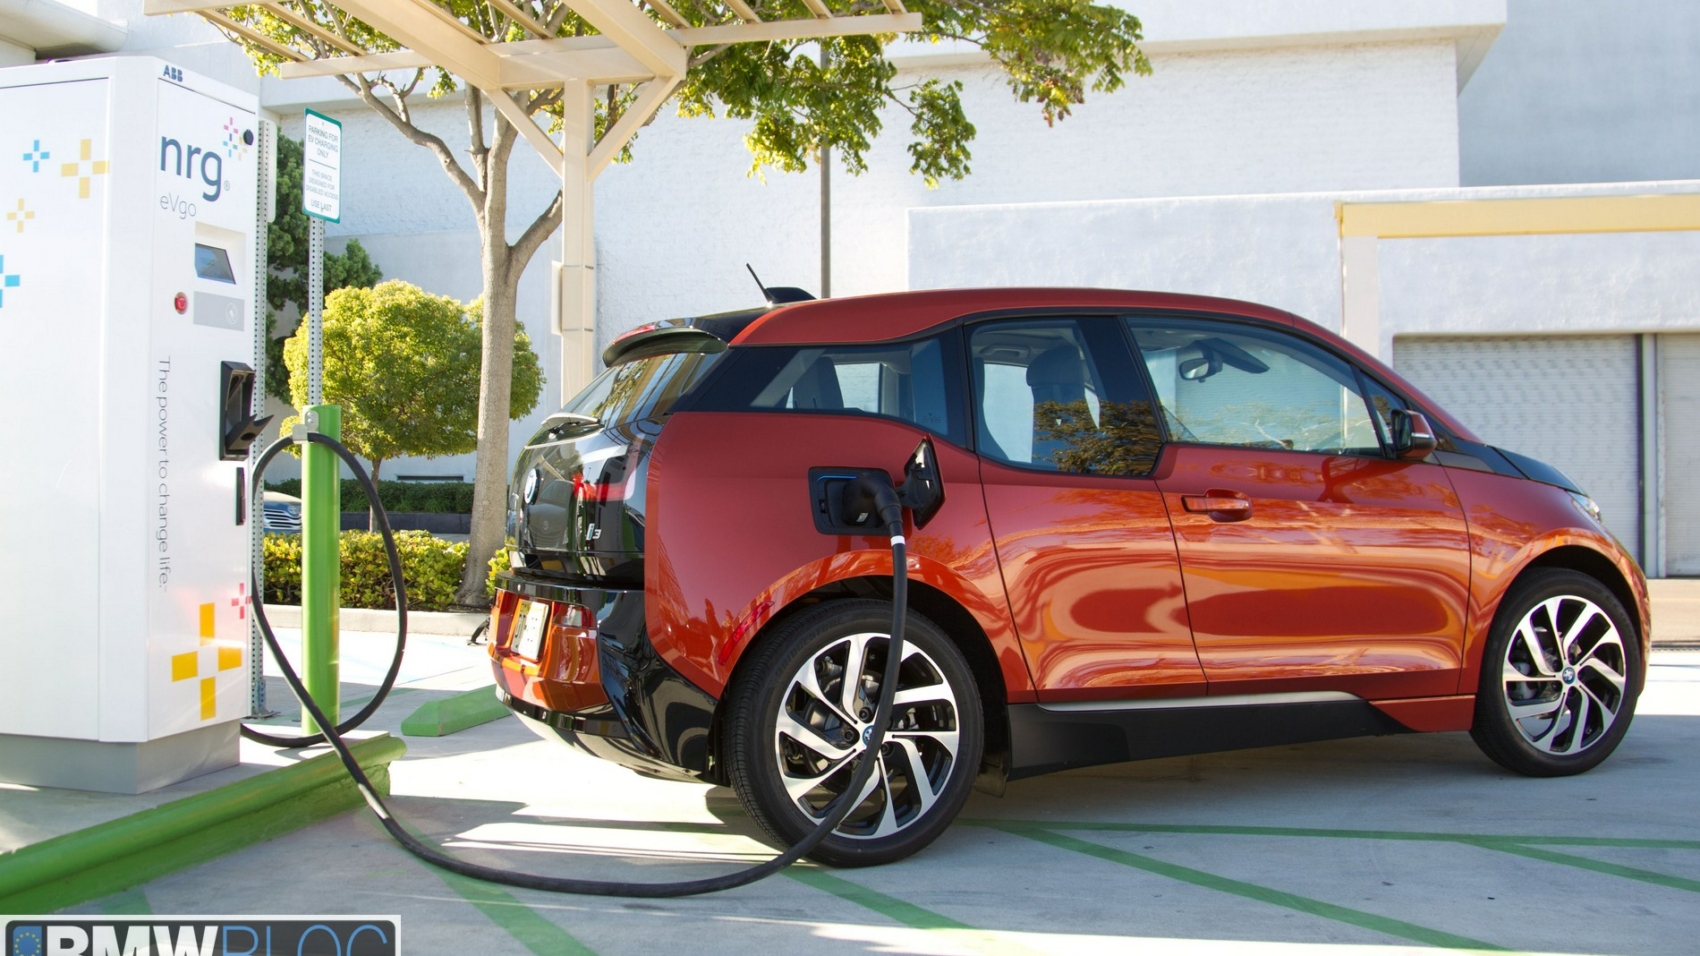 September 28, 2013.  The BMW i3 recharges at a DC Fast Charger.  Fashion Valley Mall,  San Diego, CA.